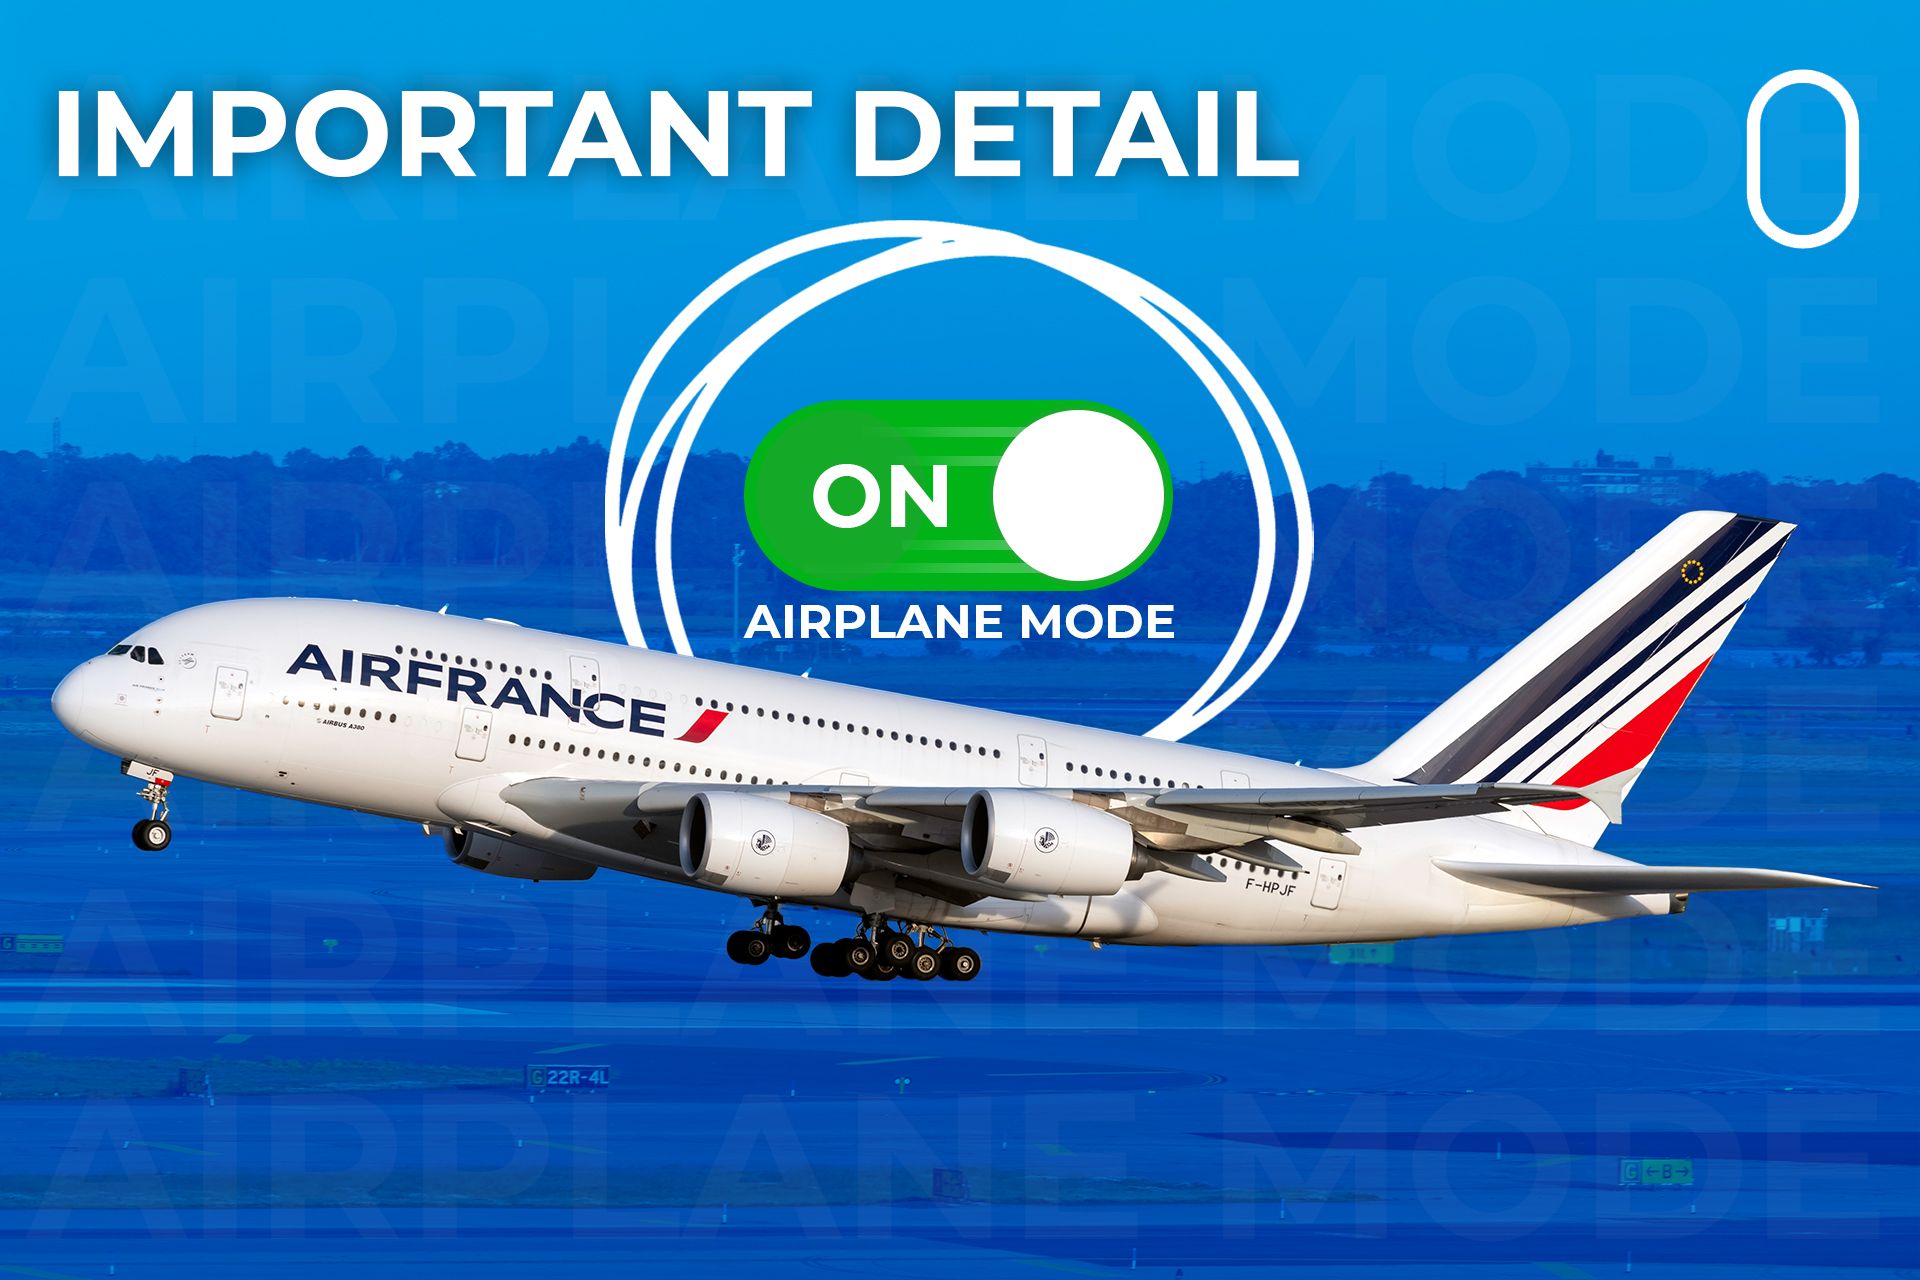 Why mobile phones and electronic devices are put on Airplane mode during  flight?